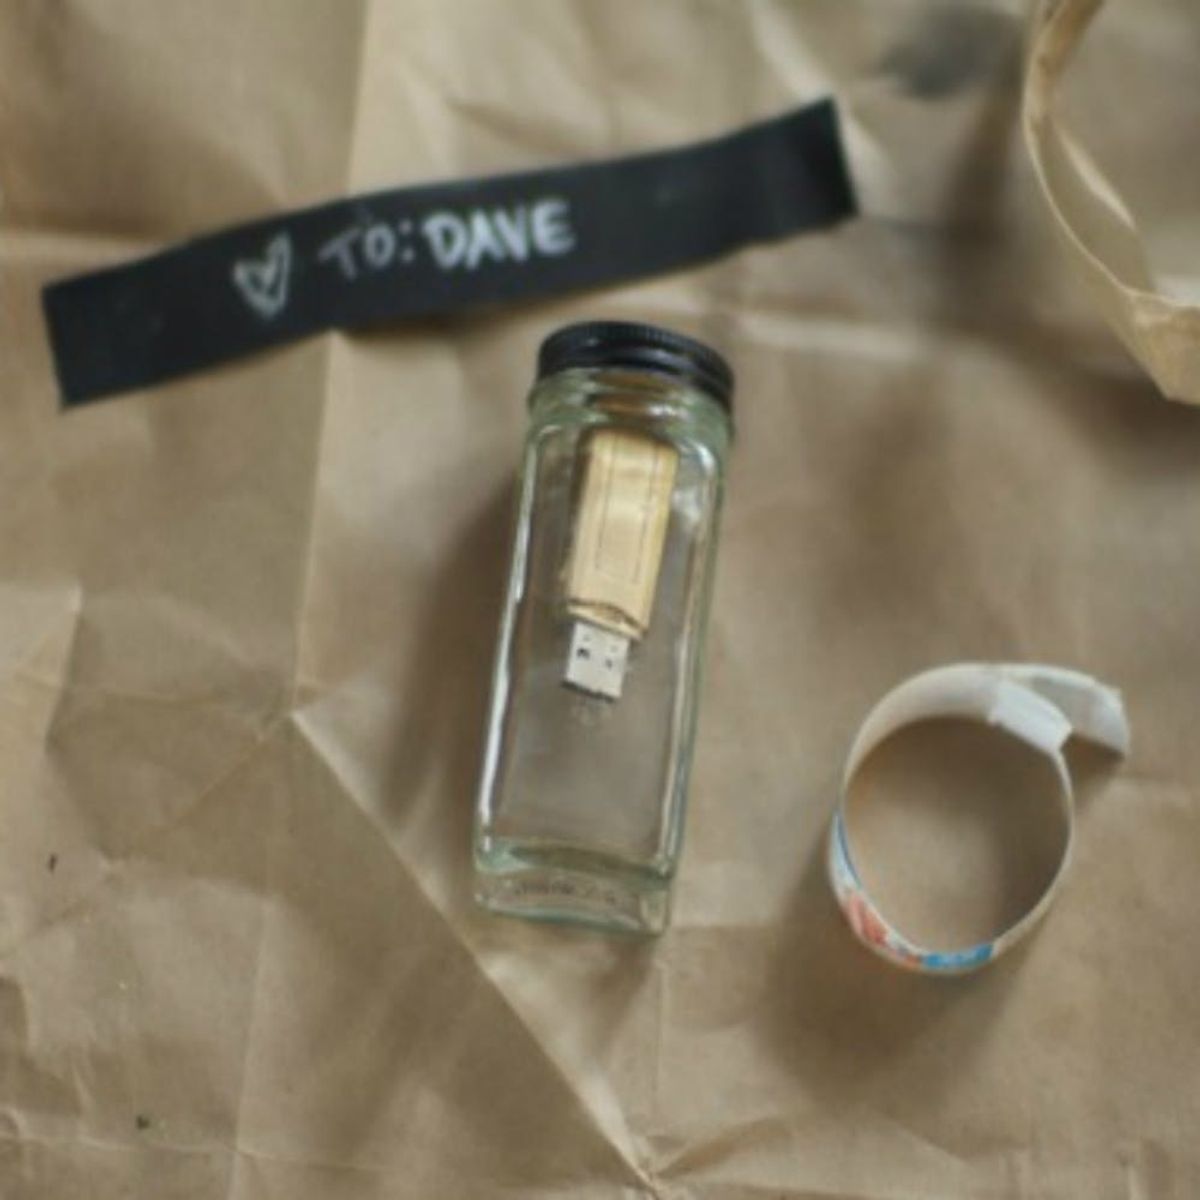 This Teen Girl Sent a Message in a Bottle and Got This Totally Unexpected Answer